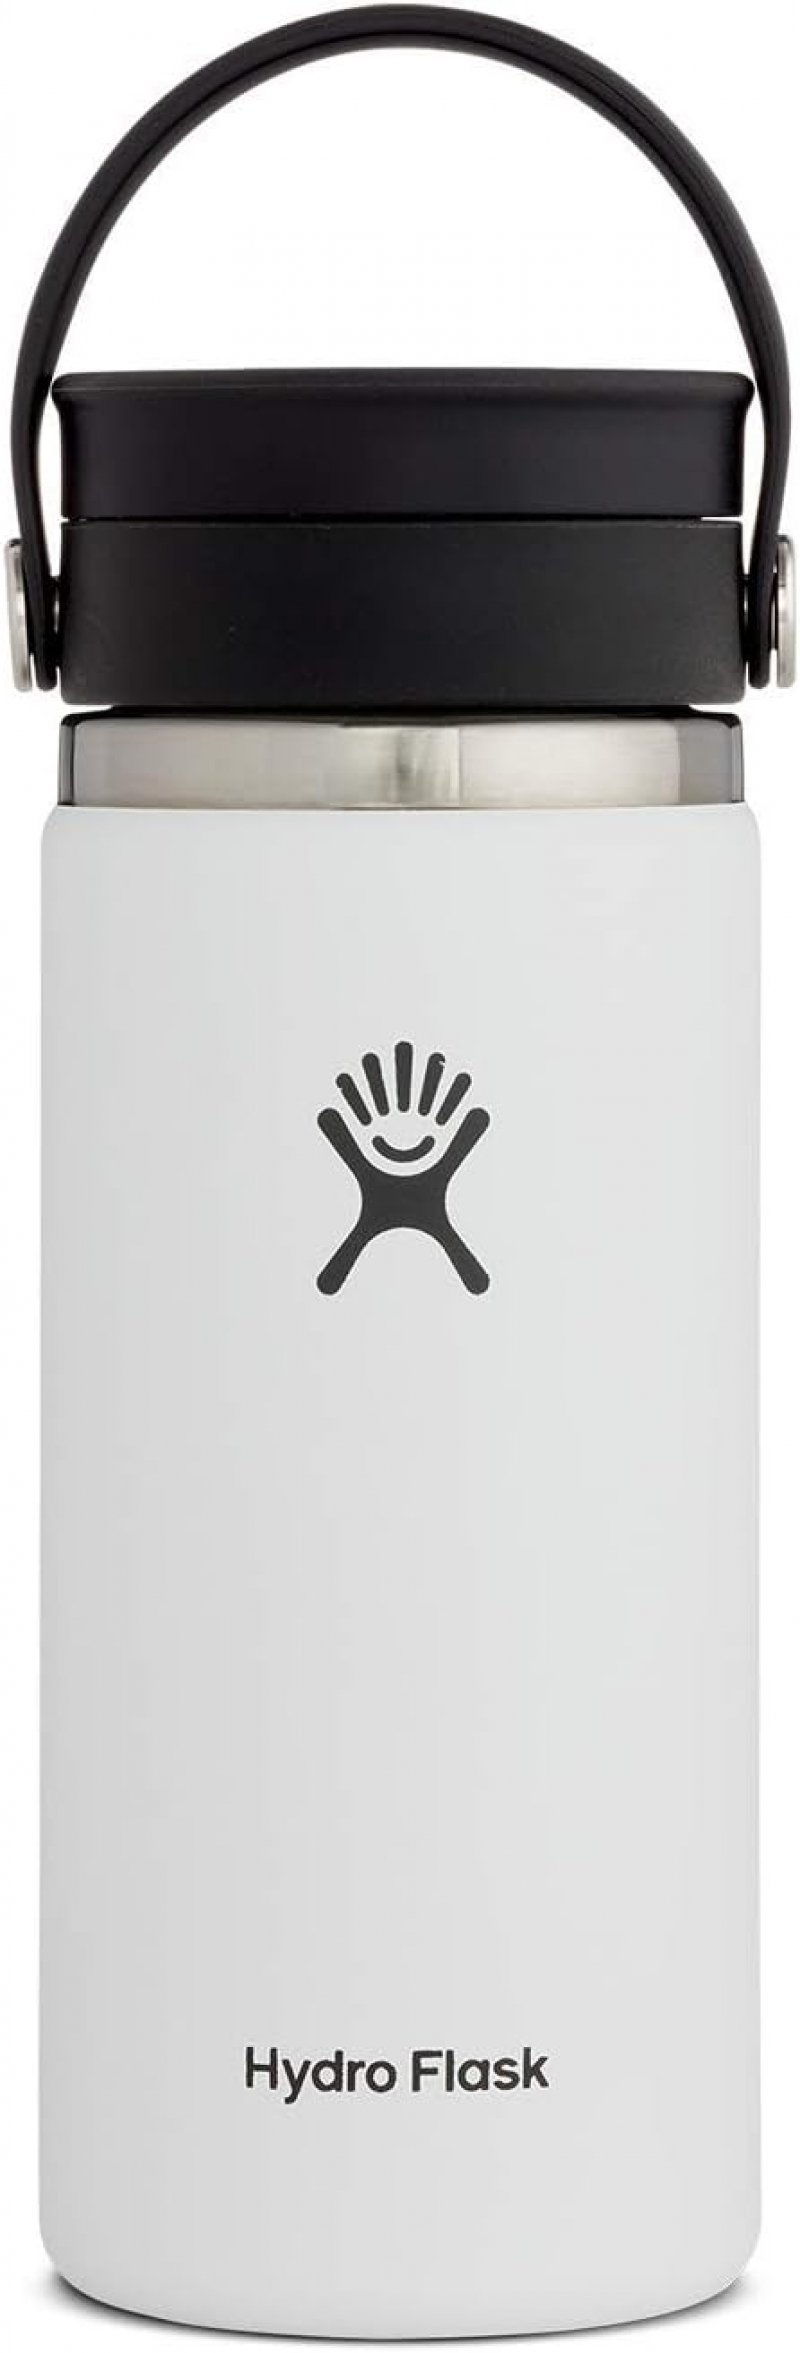 ihocon: Hydro Flask Stainless Steel Wide Mouth Bottle with Flex Sip Lid and Double-Wall Vacuum Insulation for Coffee, Tea and Drinks  16 oz, 不锈钢广口保温水瓶